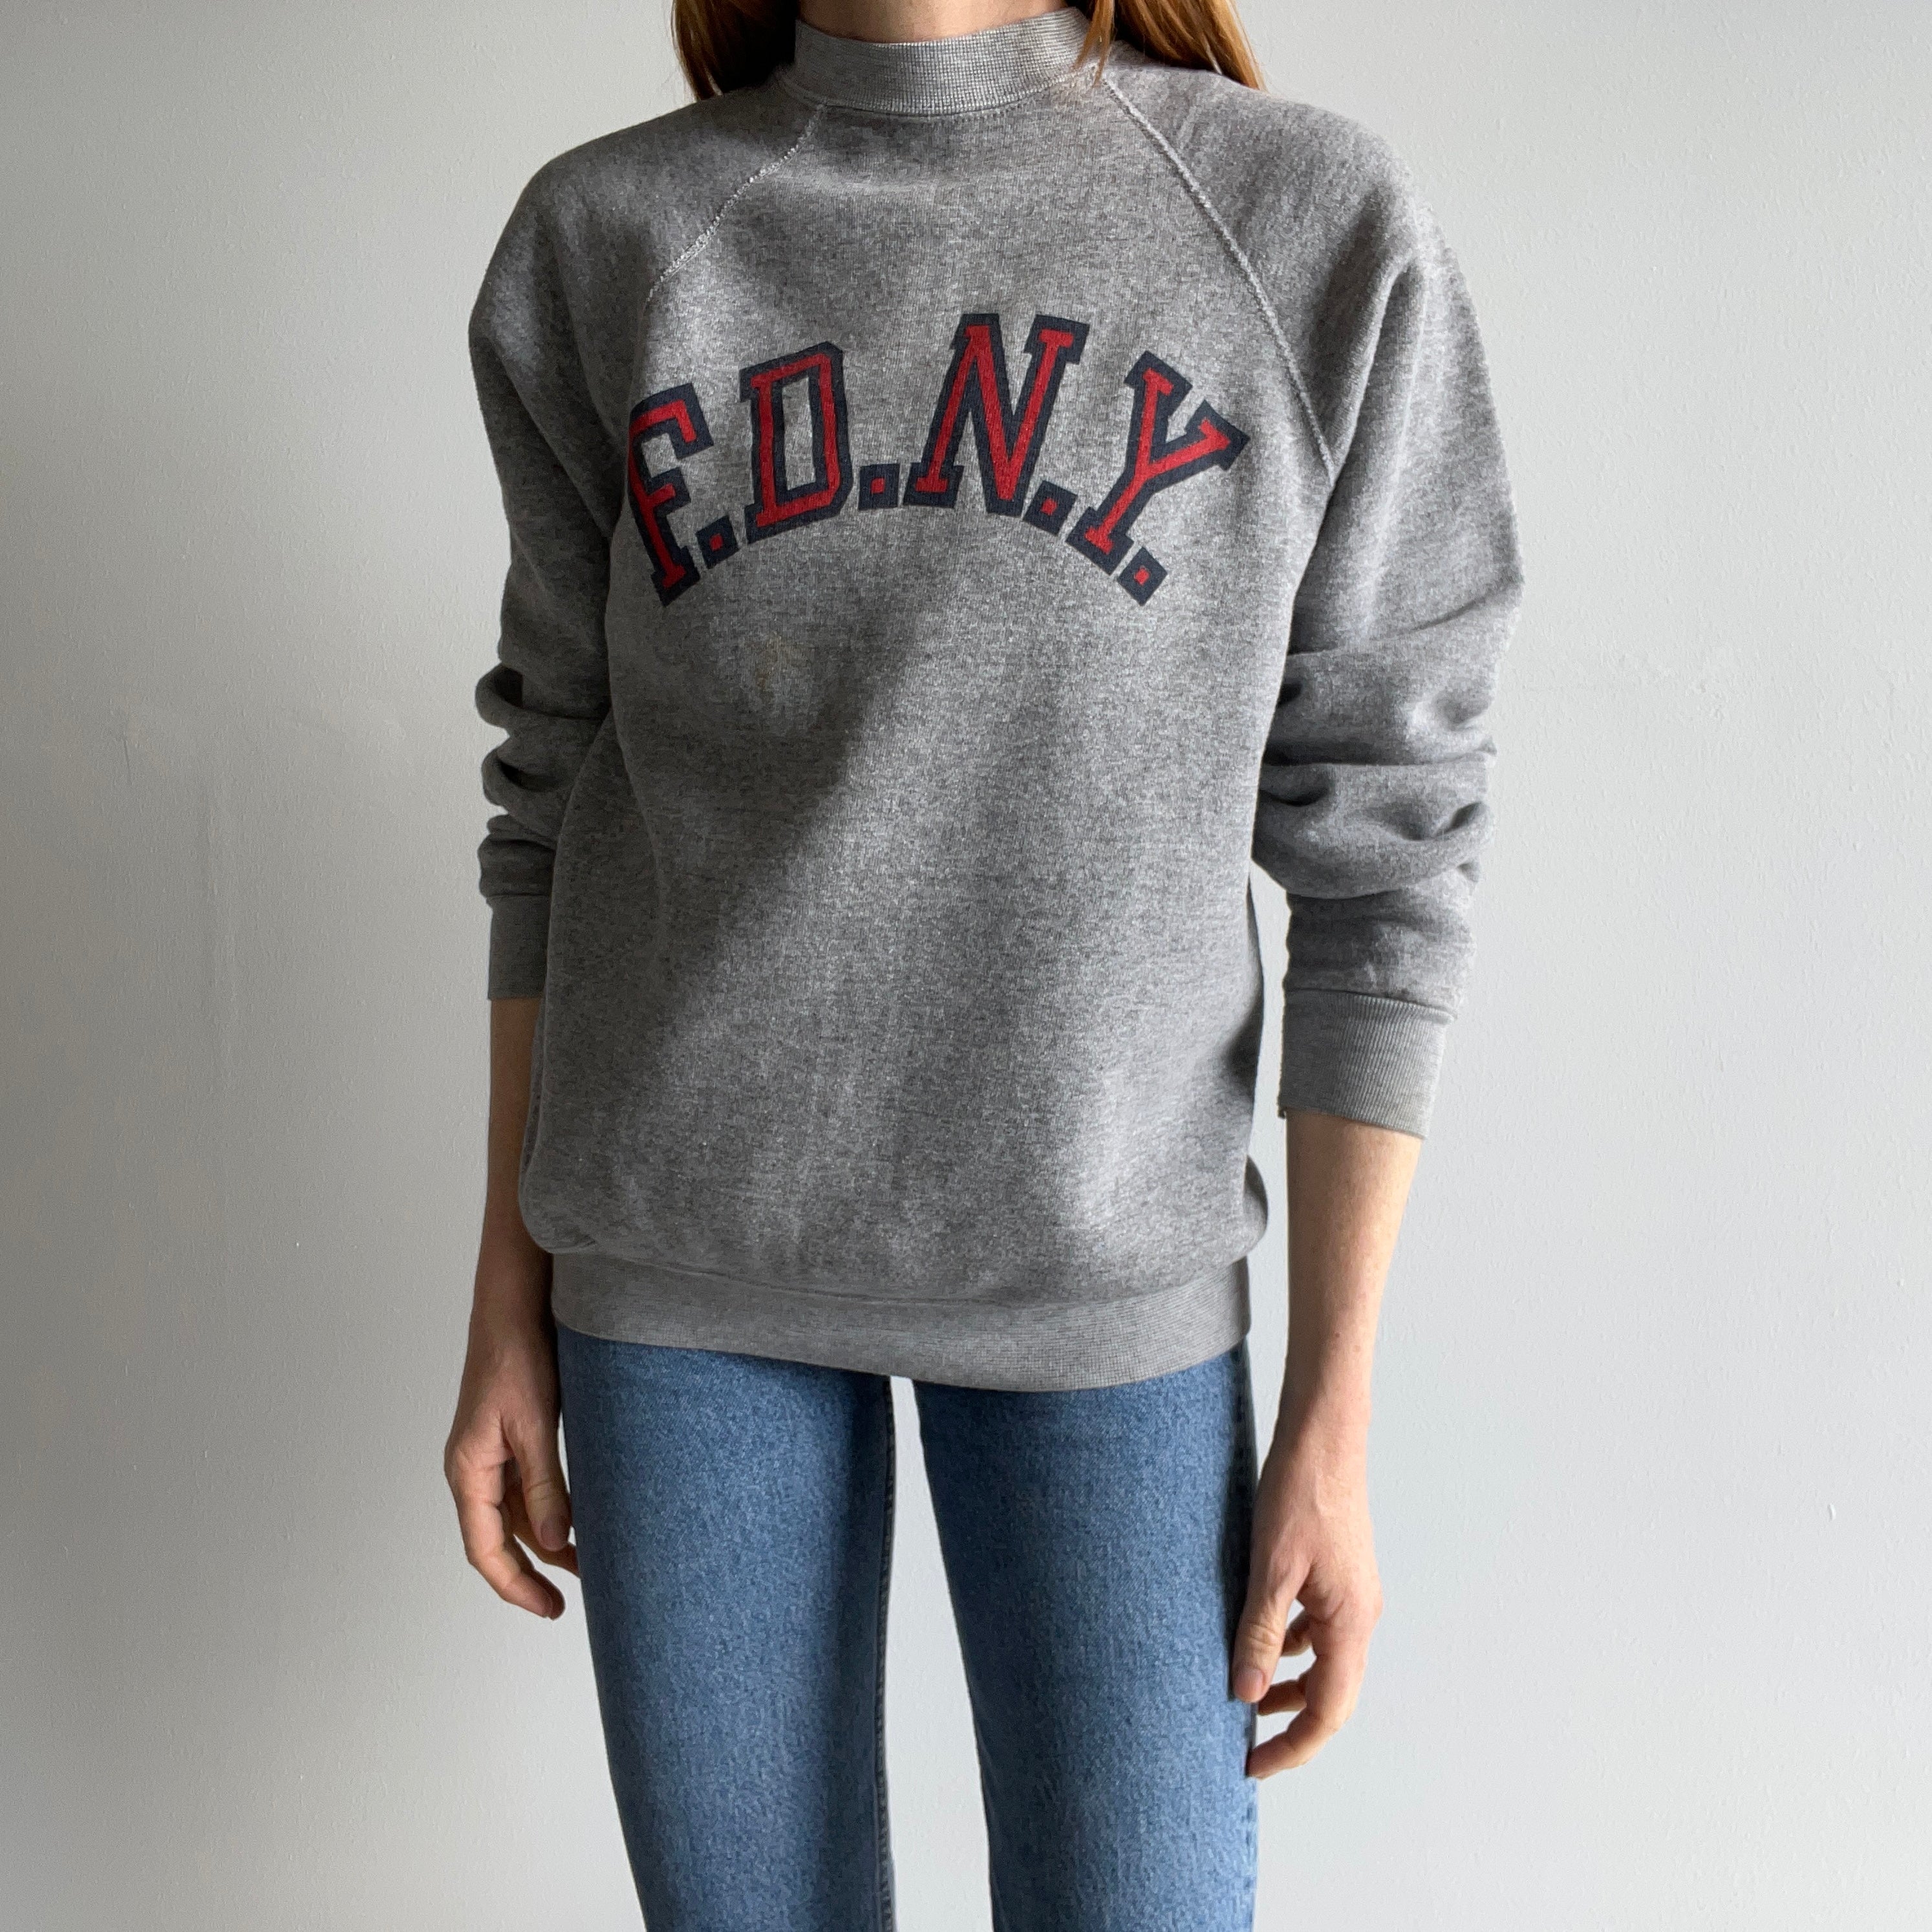 1980s FDNY Sweatshirt by Discus - WOW